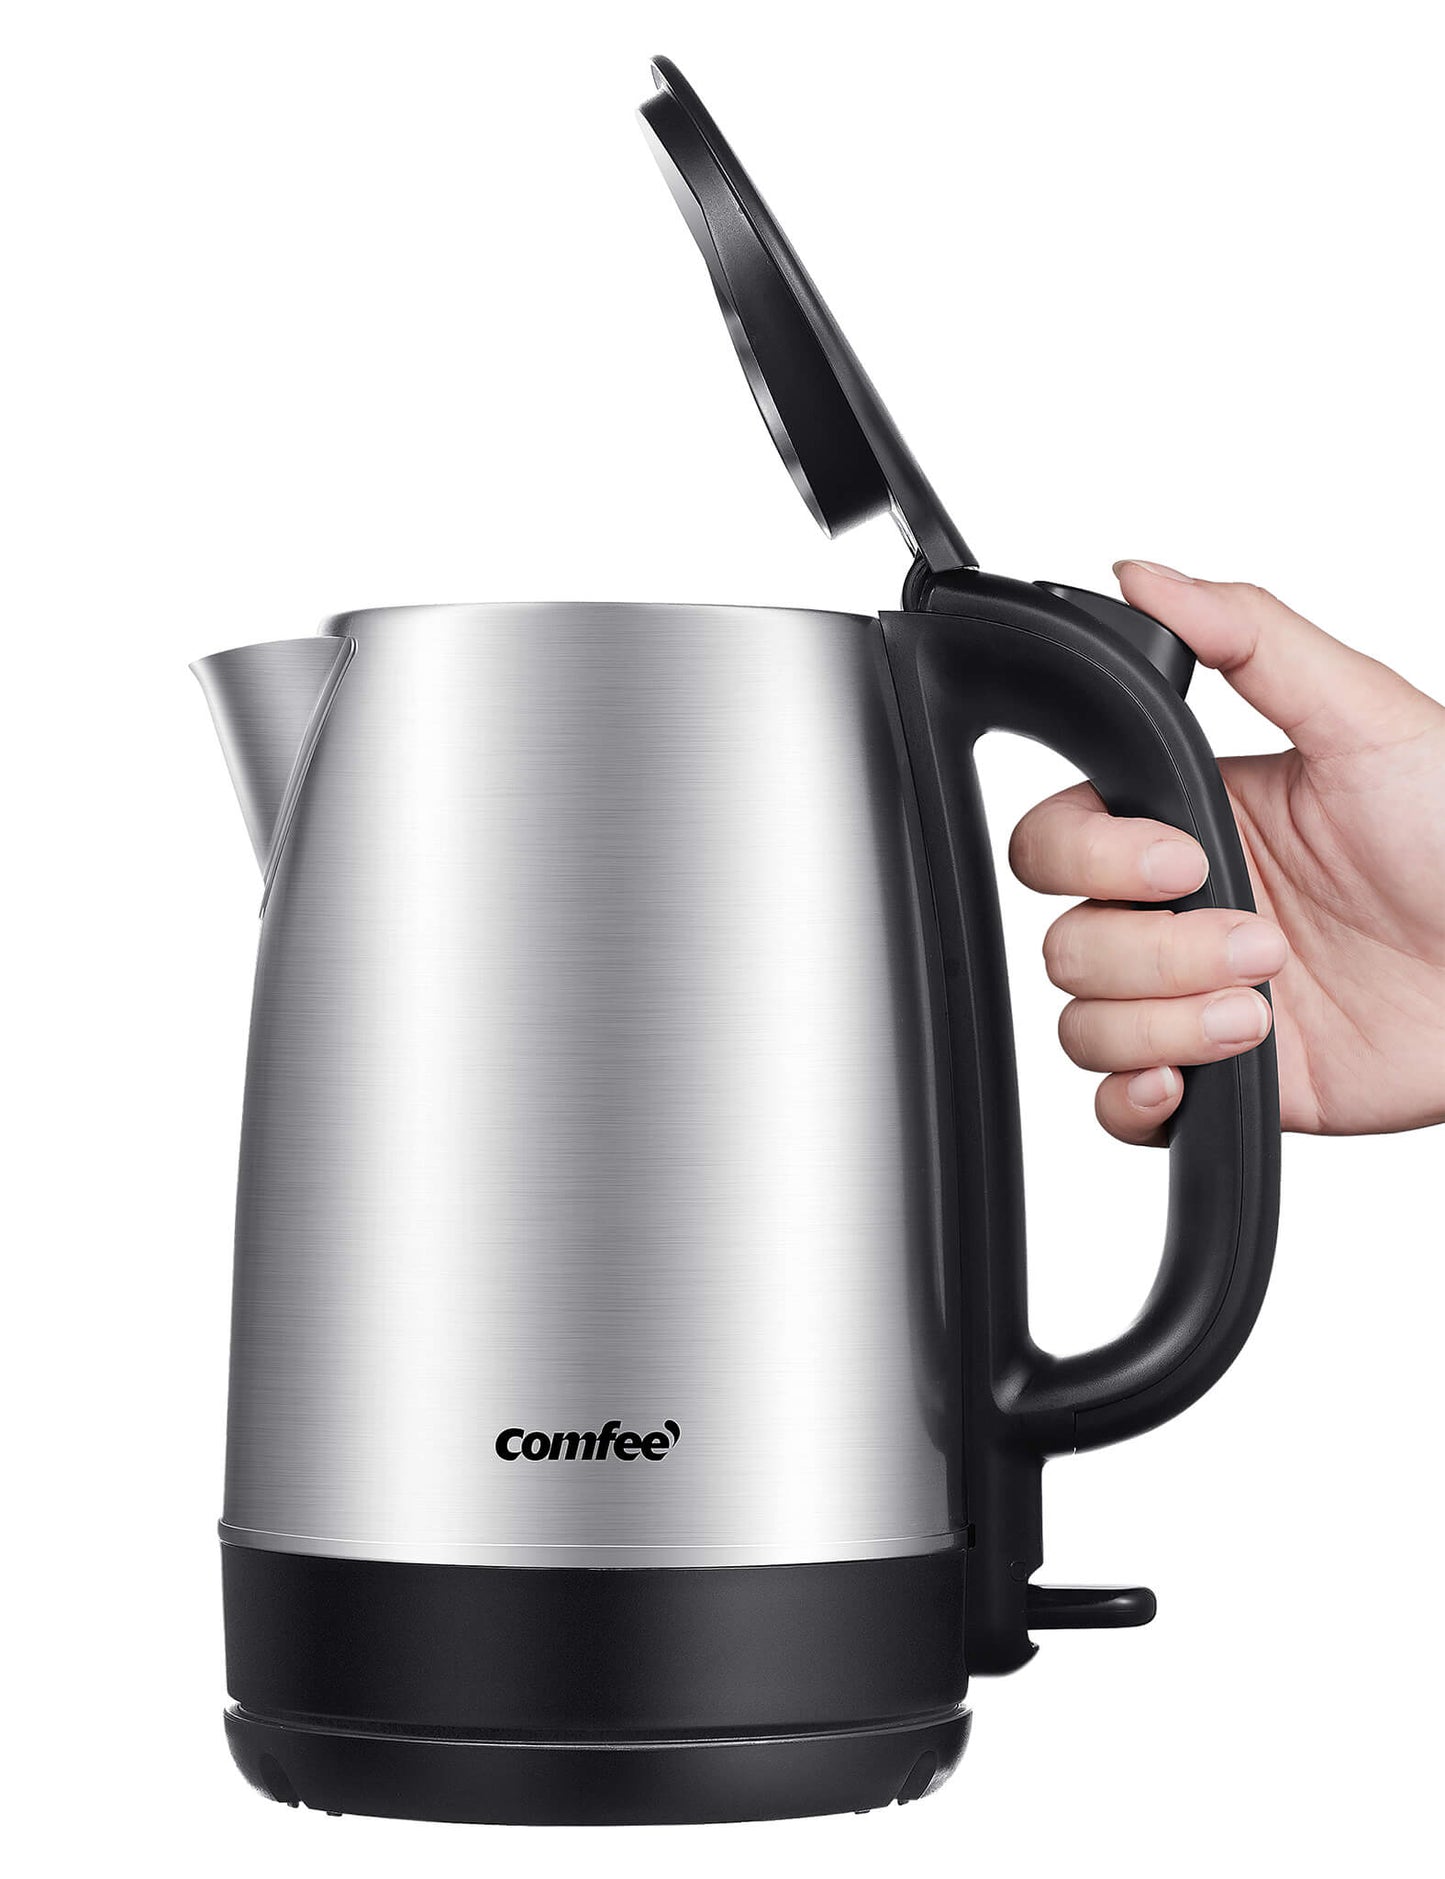 stainless steel comfee electric tea kettle its lid open